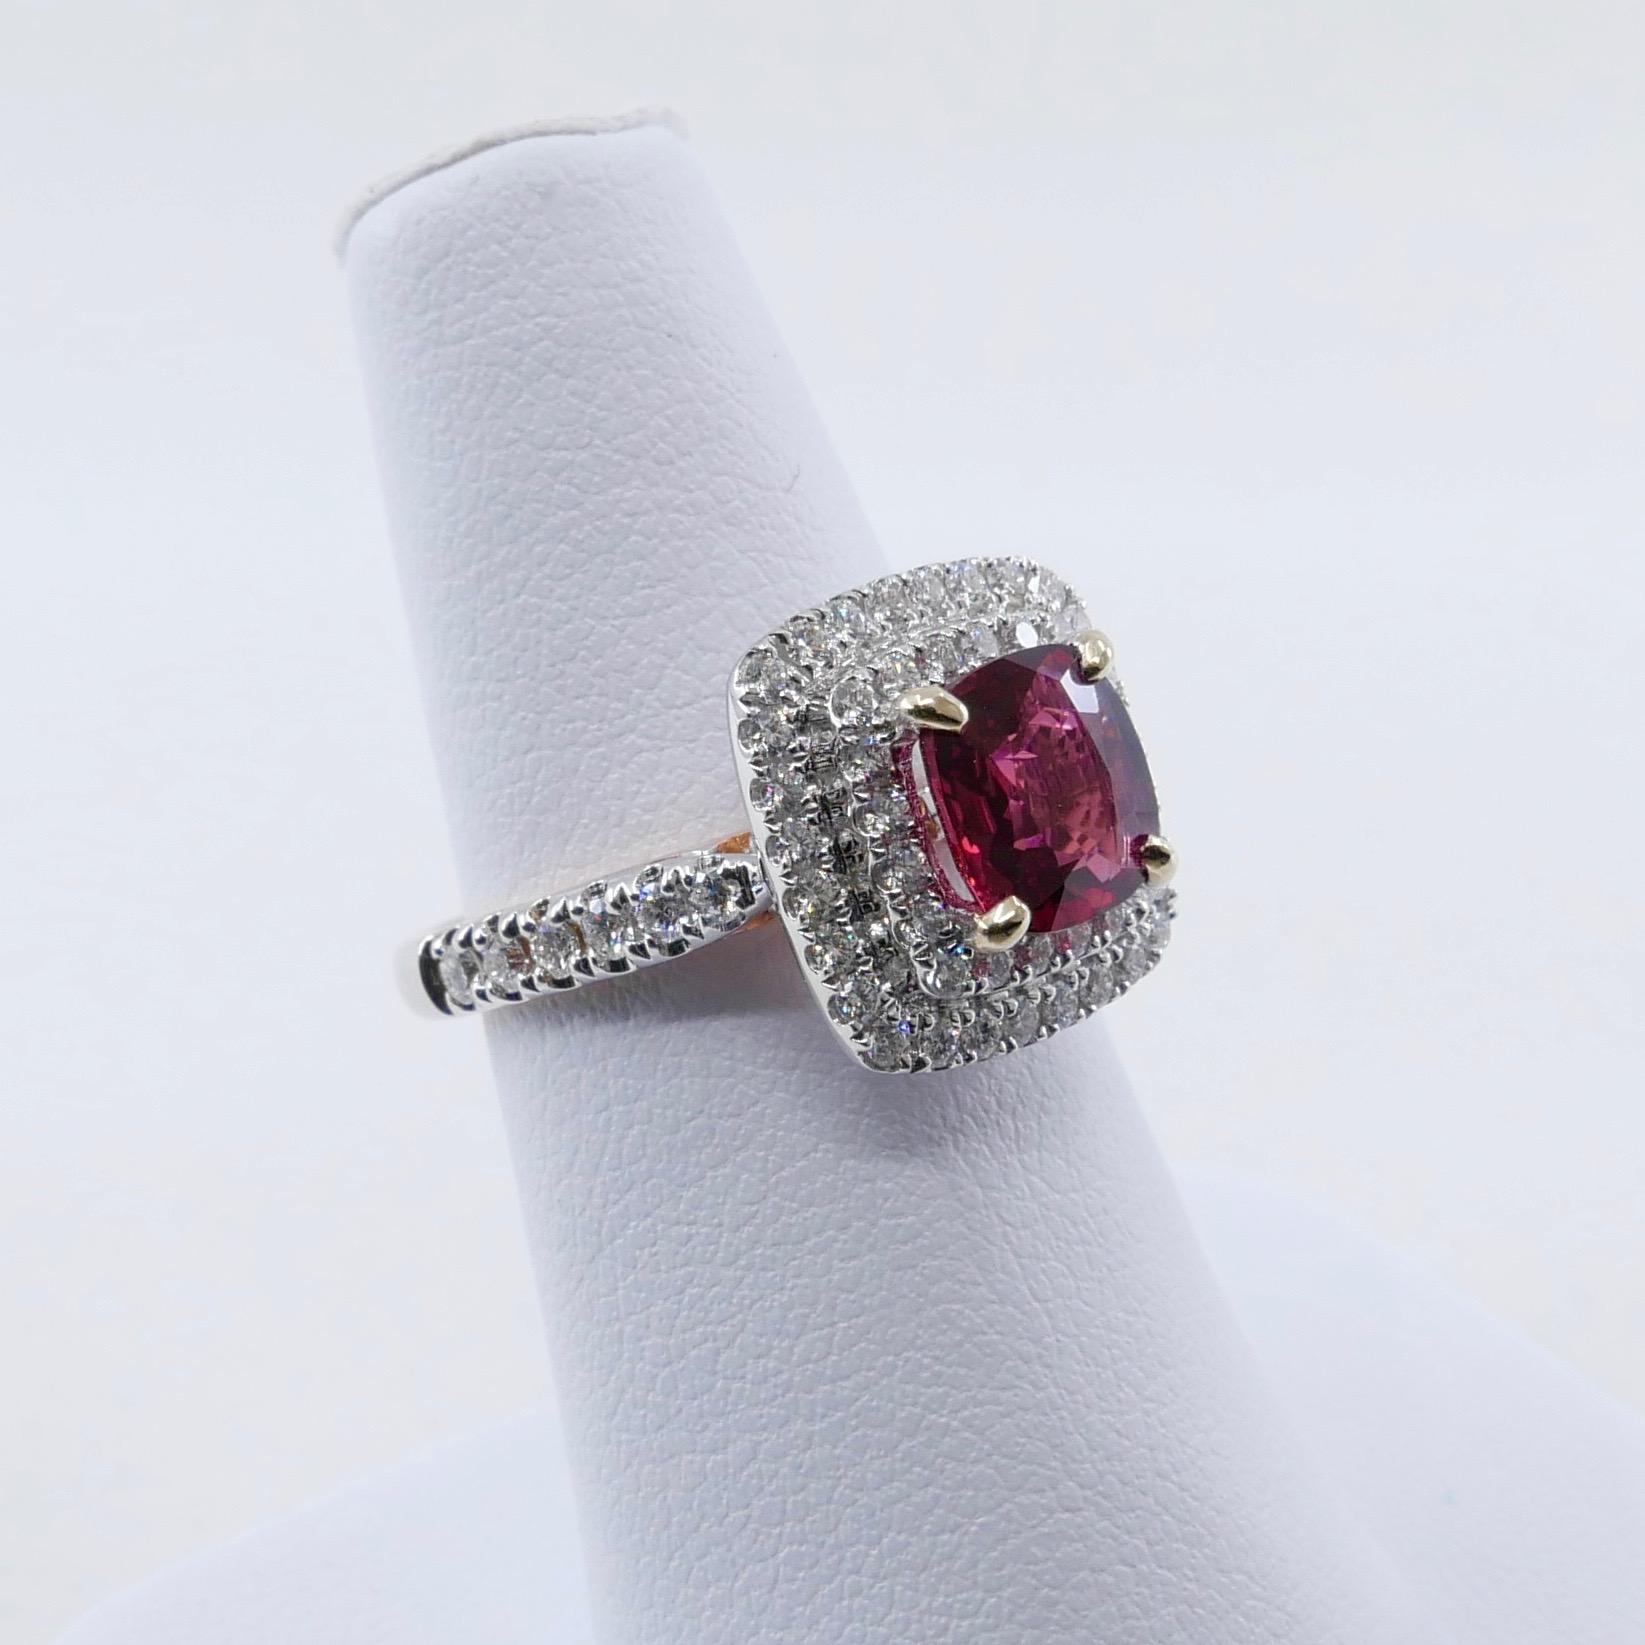 Natural Red Spinel 1.51 Carat and Diamond Ring 18K Two-Tone White and Rose Gold 1